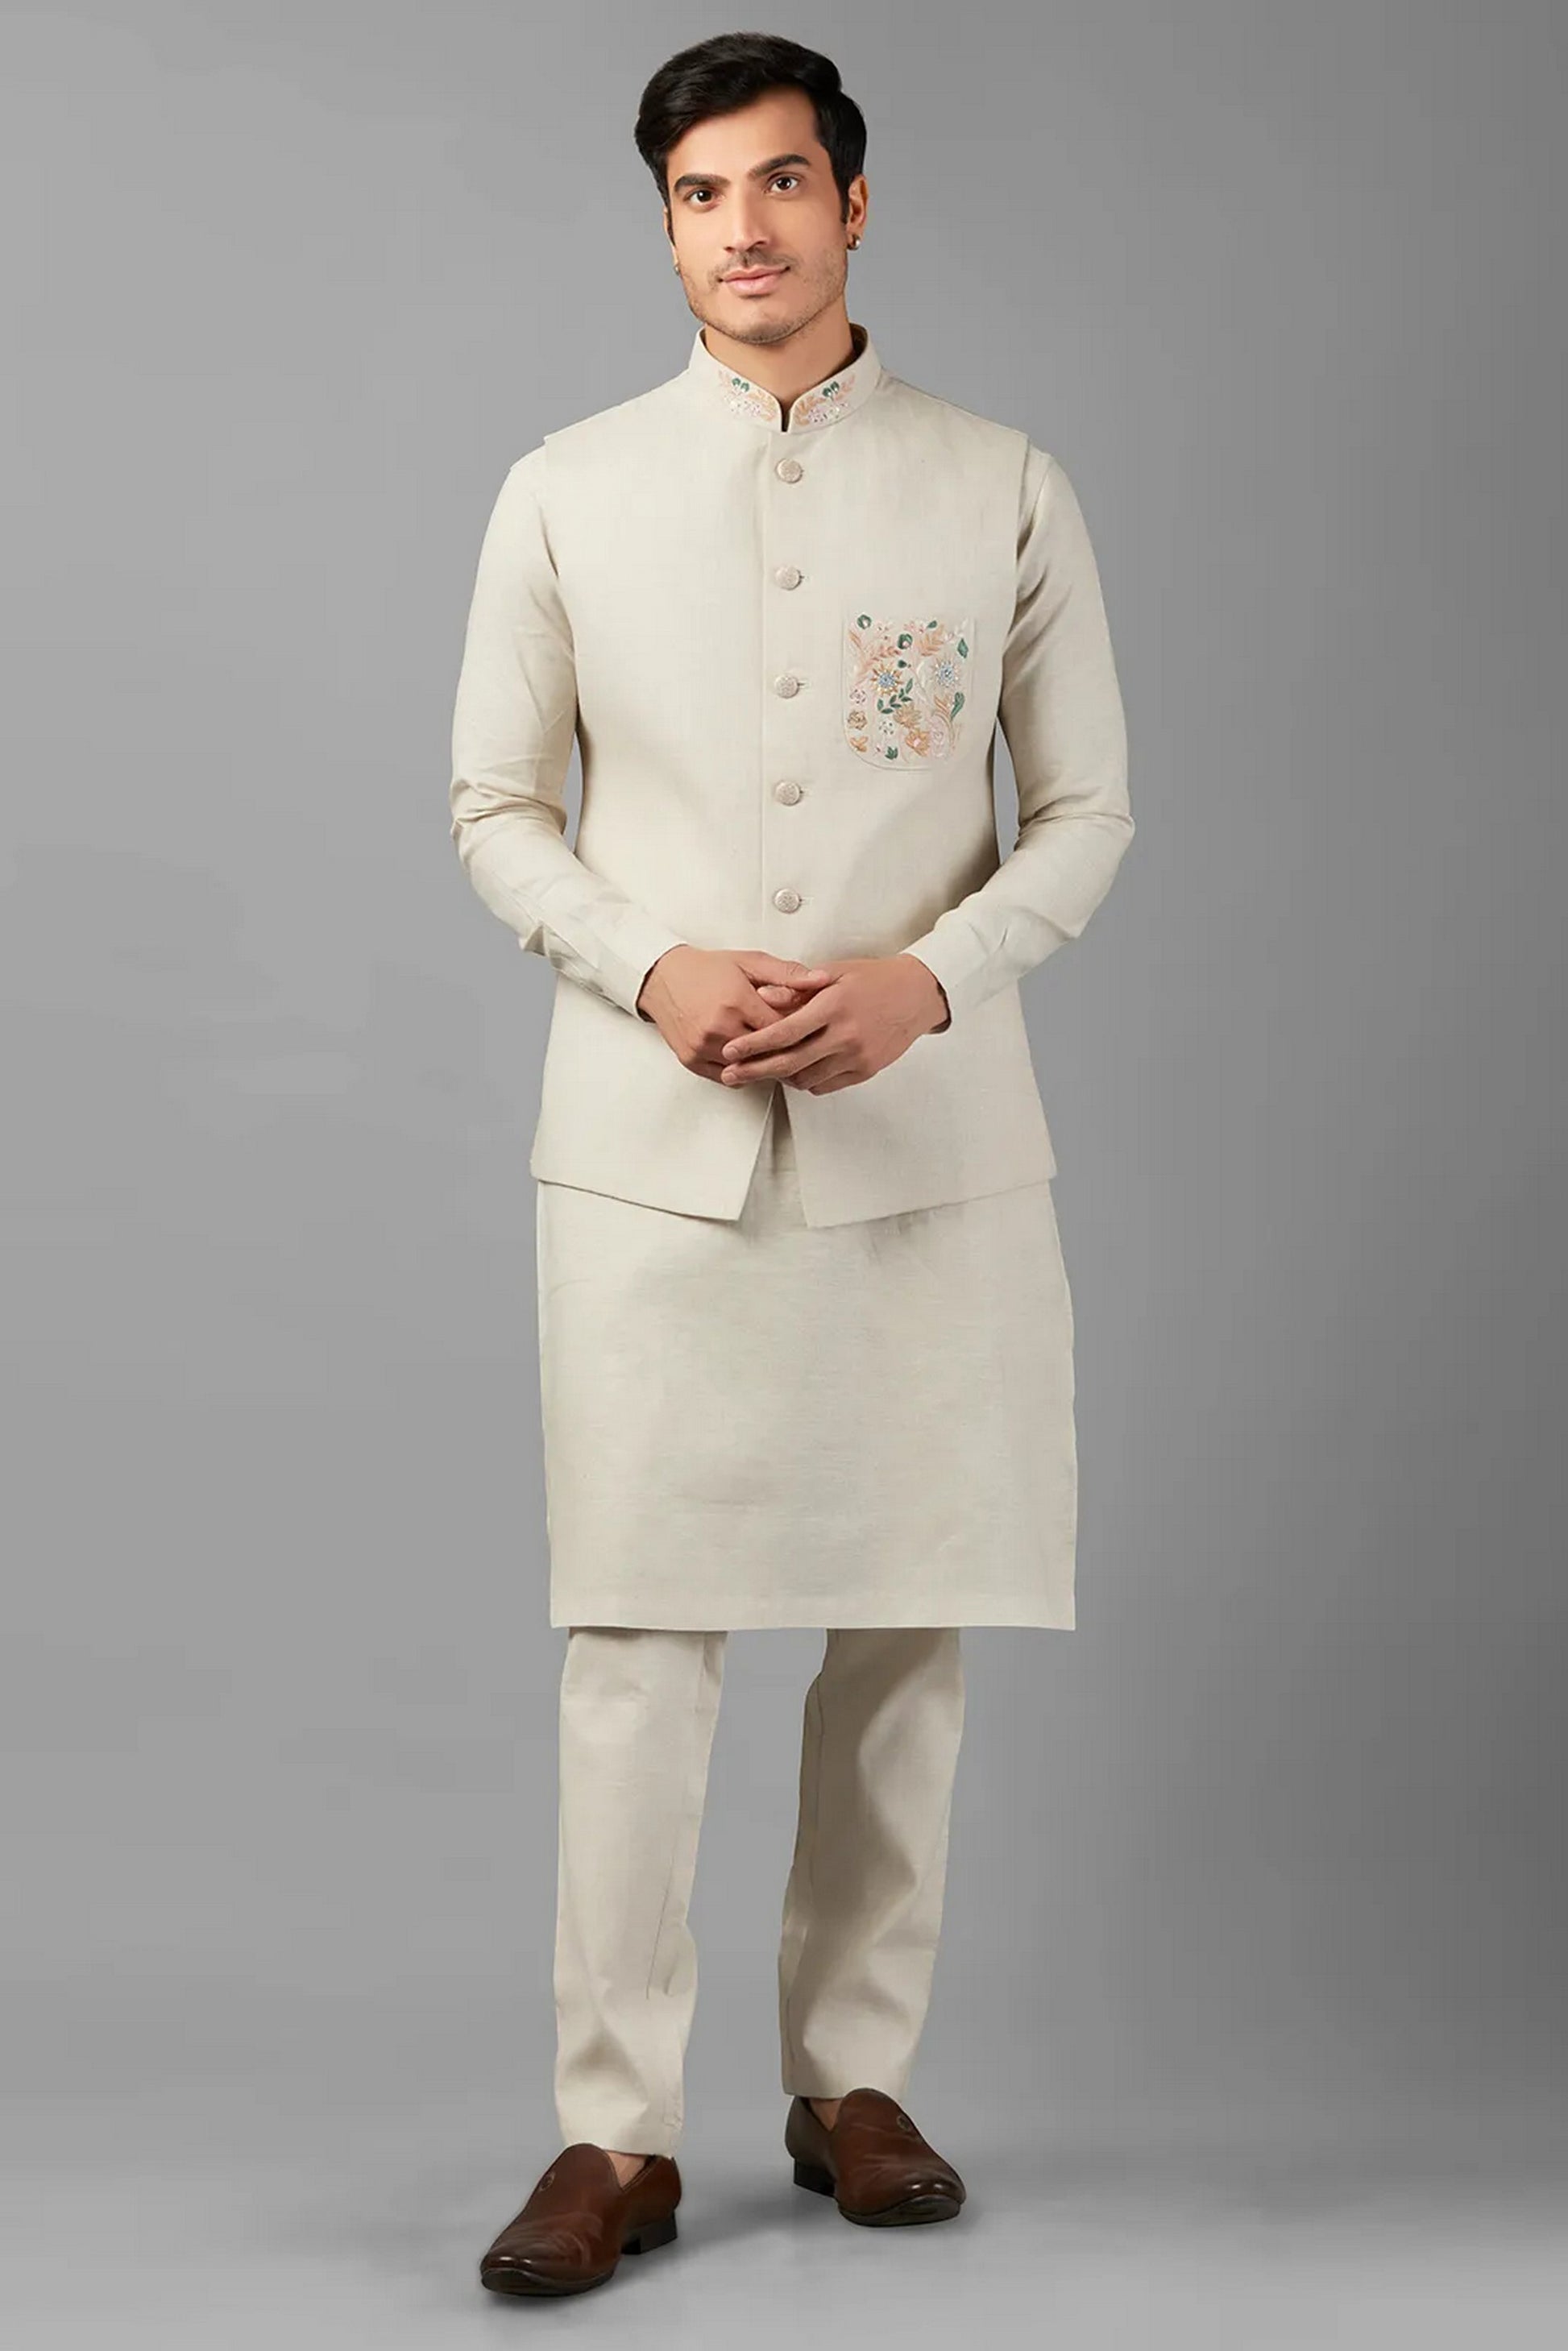 Off White Linen Men's Wedding Suit Waistcoat, Kurta with Pant - Embroidery Work